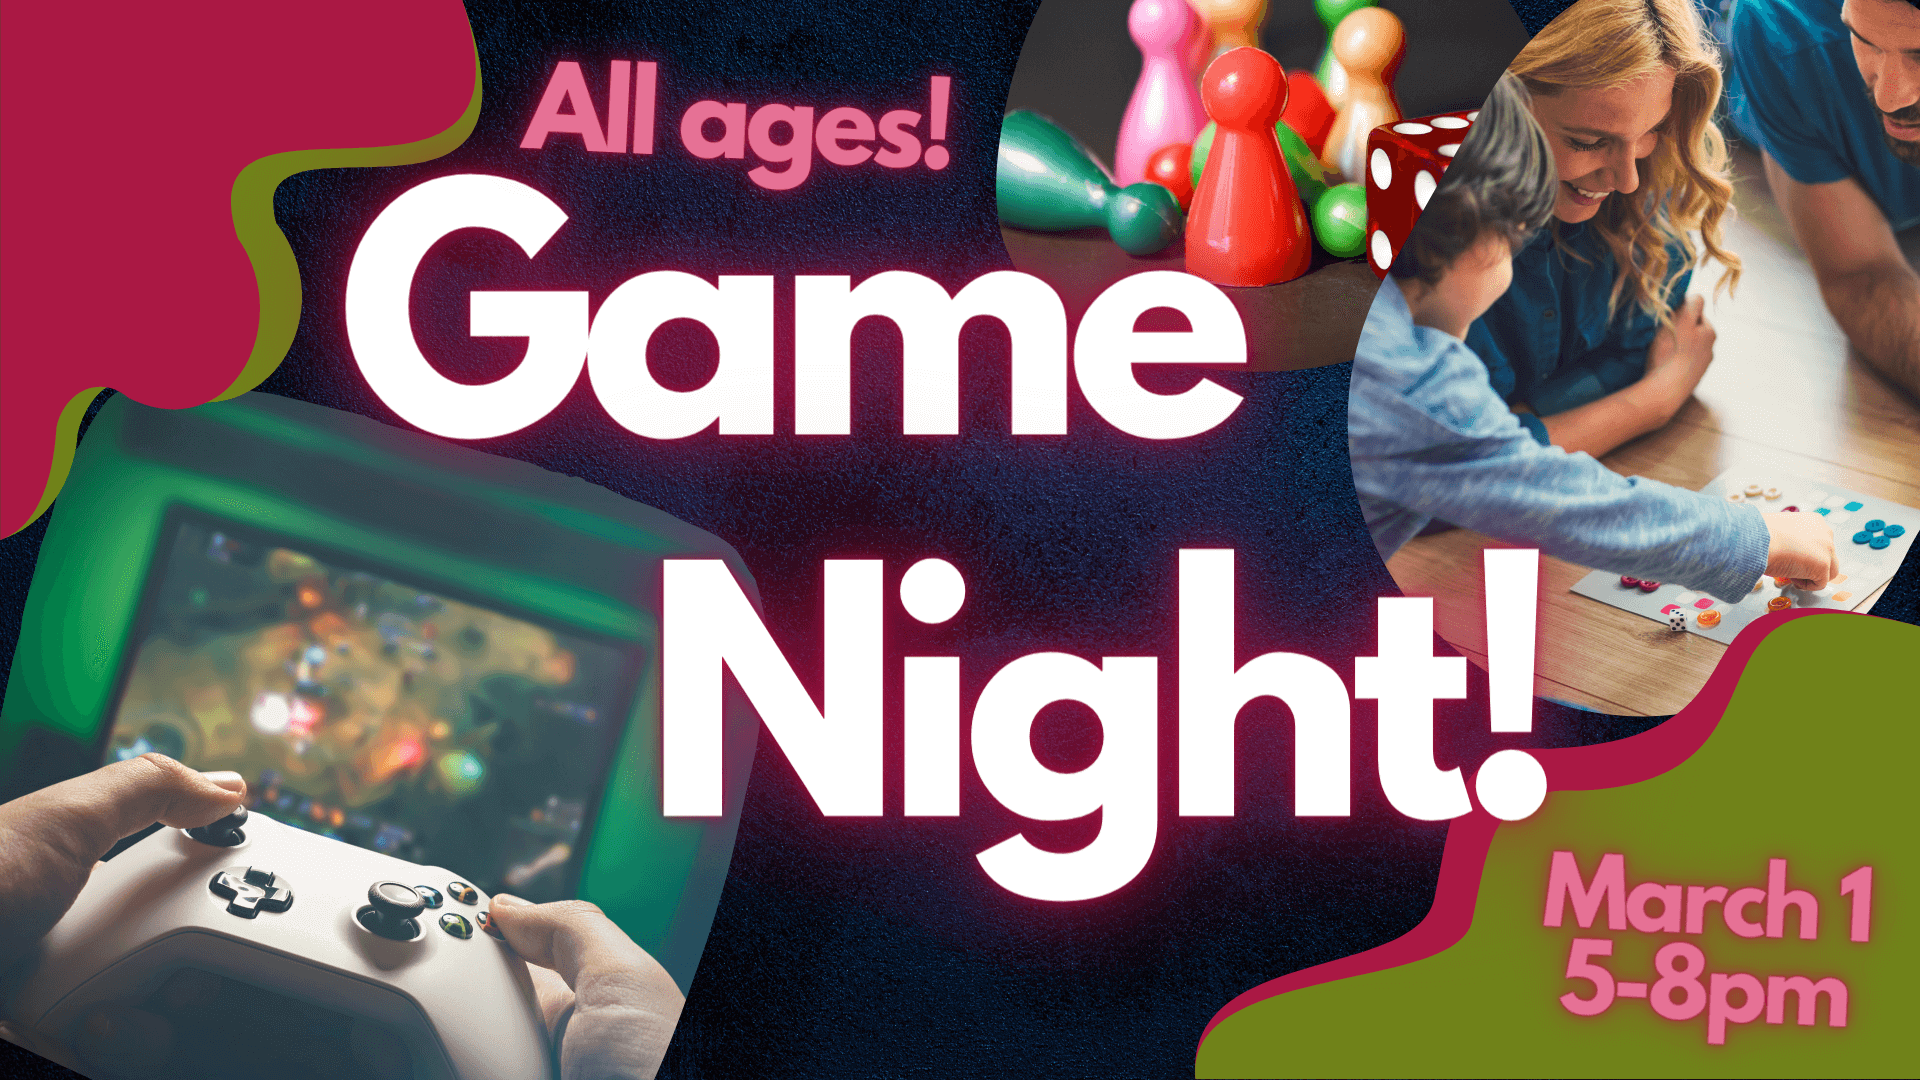 All ages! Game Night March 1 5-8pm - Picture of family playing a board game, and a video game controller